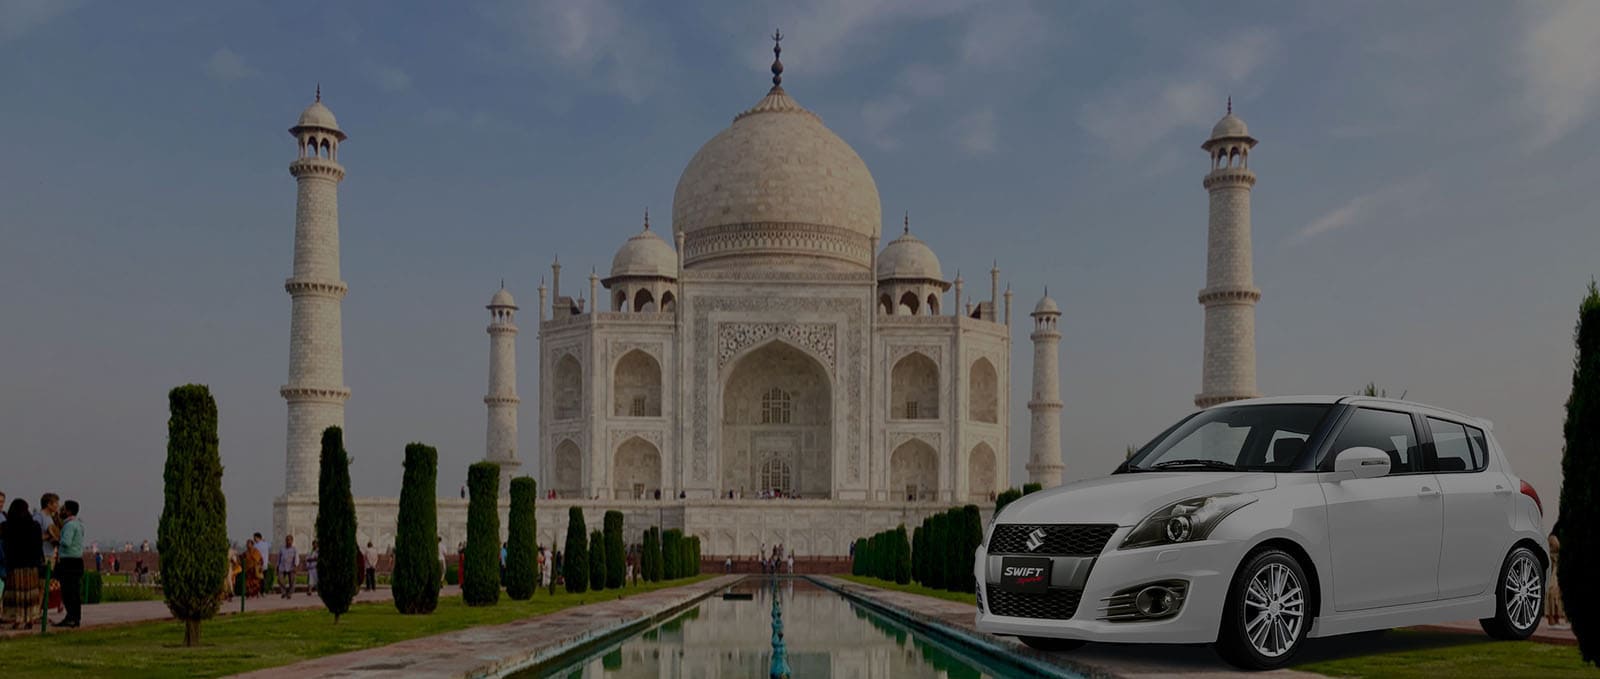 Cab Service in Agra